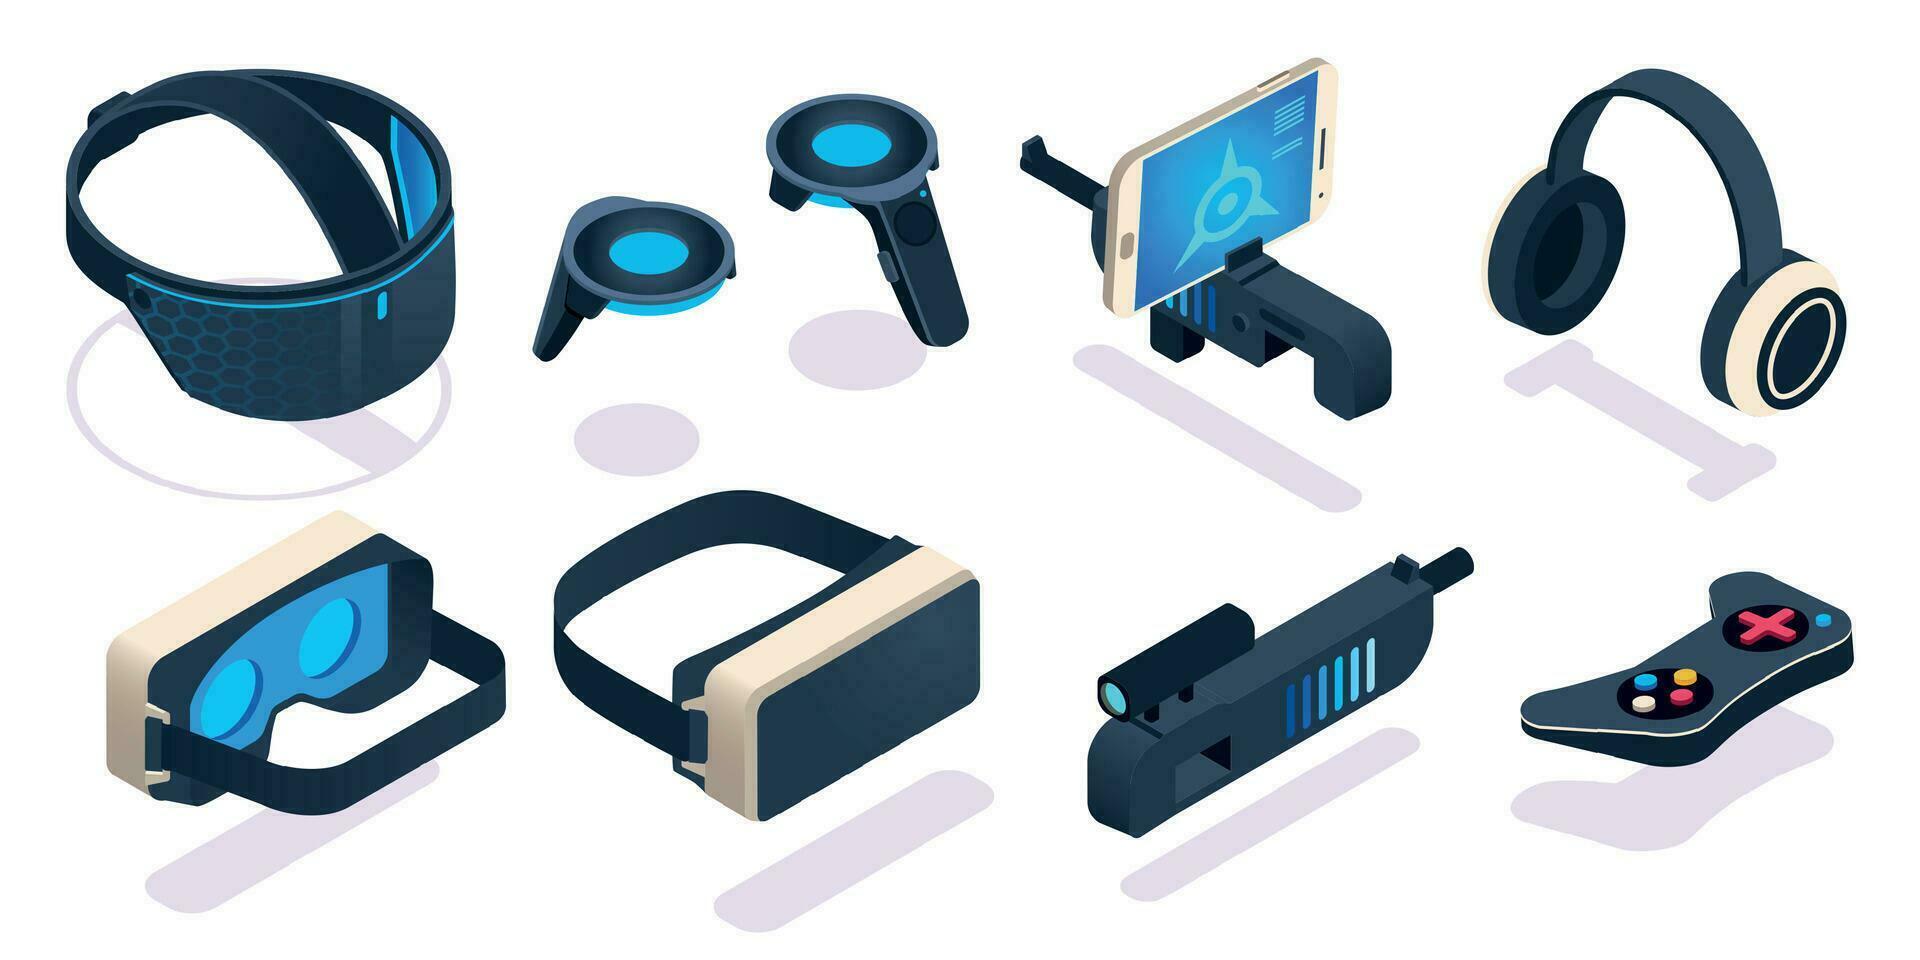 Virtual reality gaming equipment. Digital device or portable gadget for games as 3d glasses, headset, joystick vector